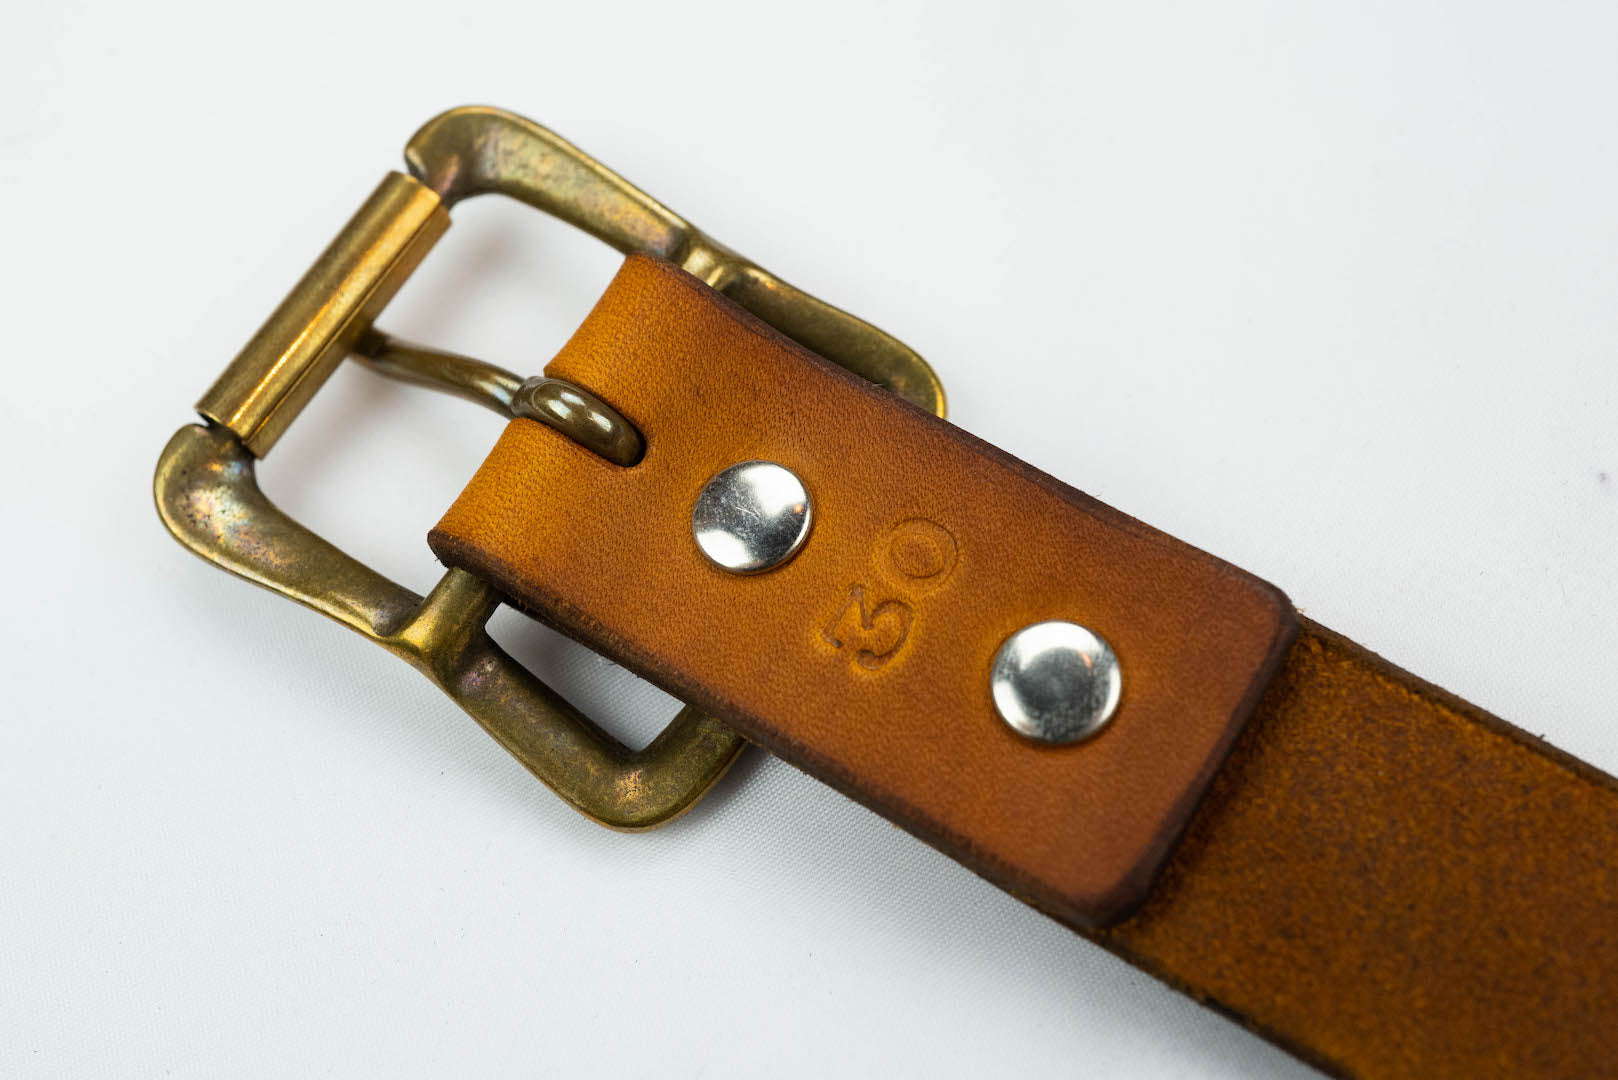 Stevenson Overall Co. Tan Narrow Cowhide Belt (Special Edition)